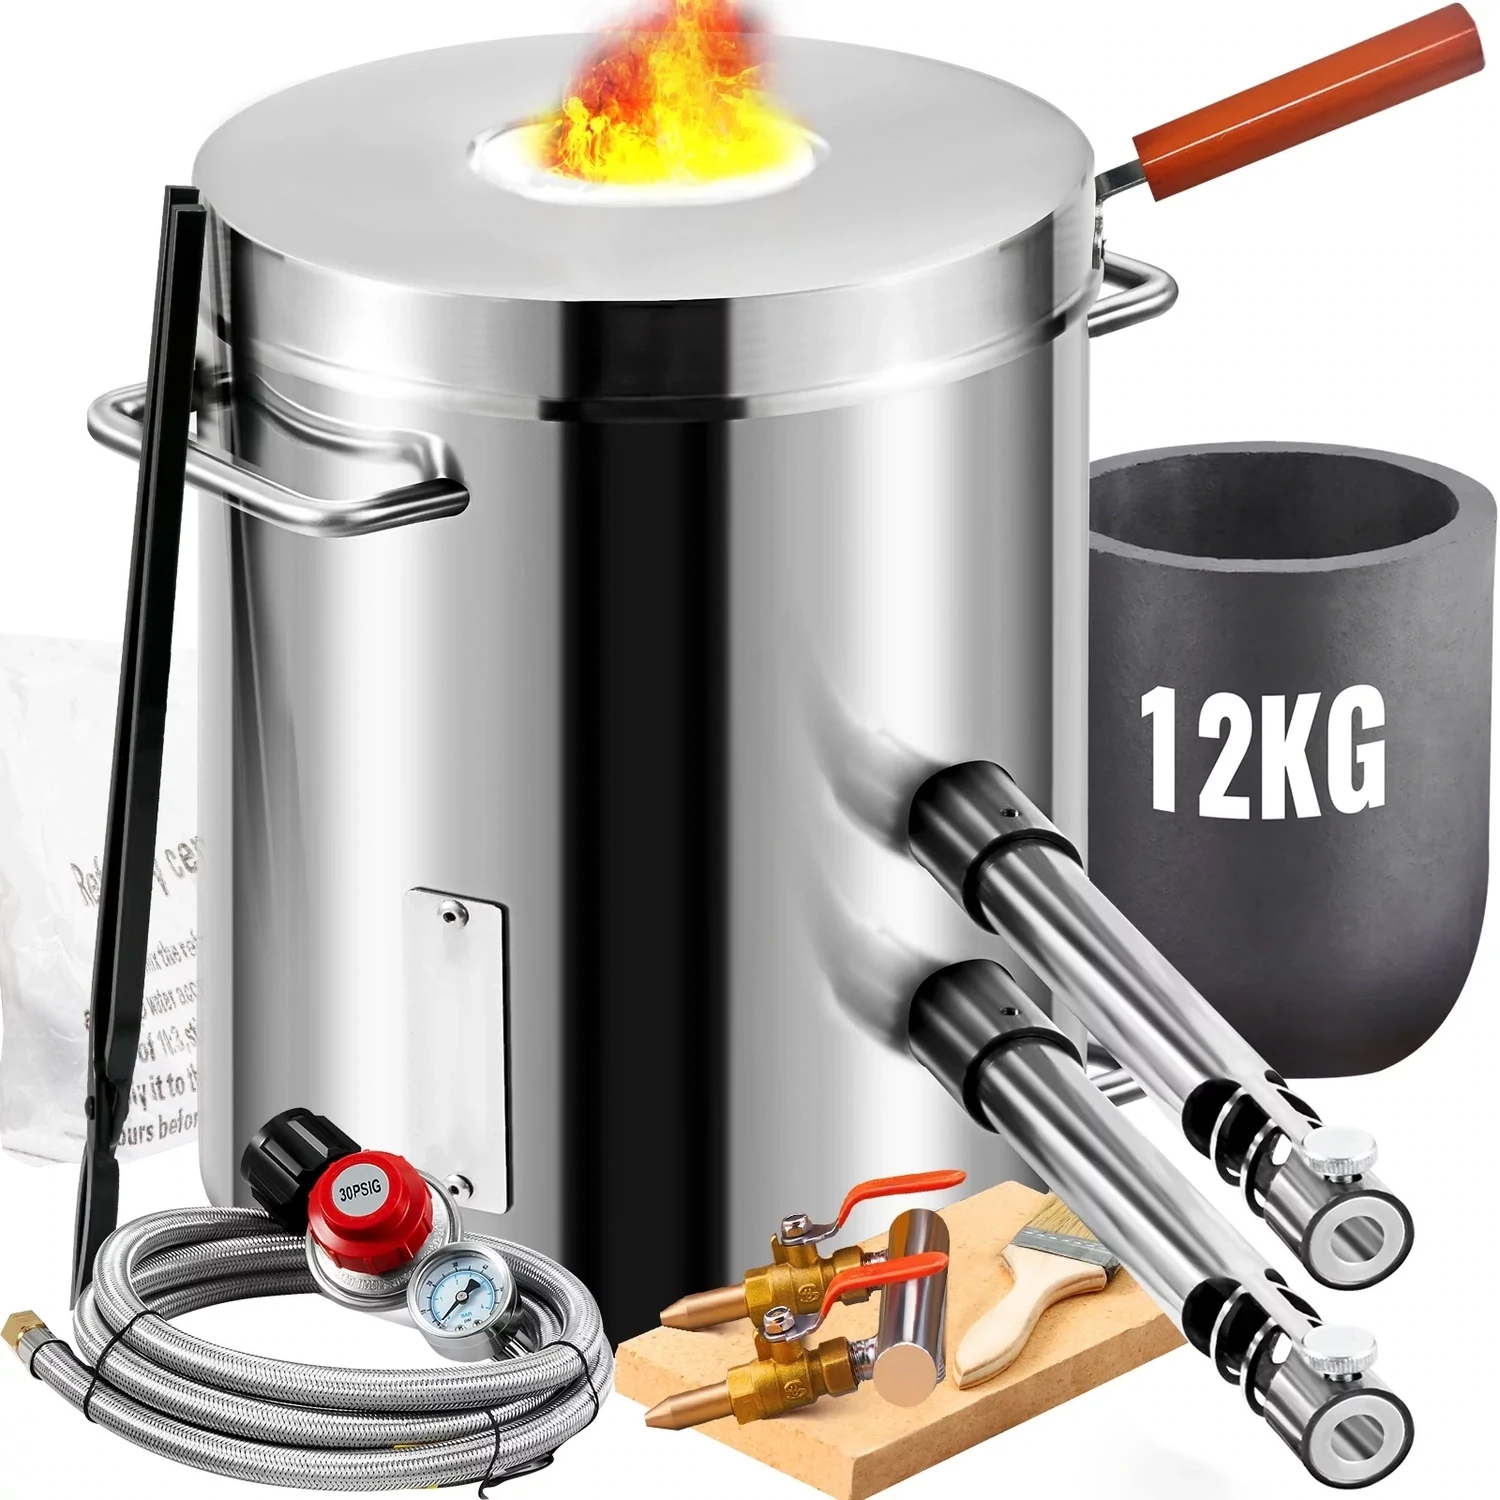 Melting Furnace Kit with Double Burners for 12KG of Propane